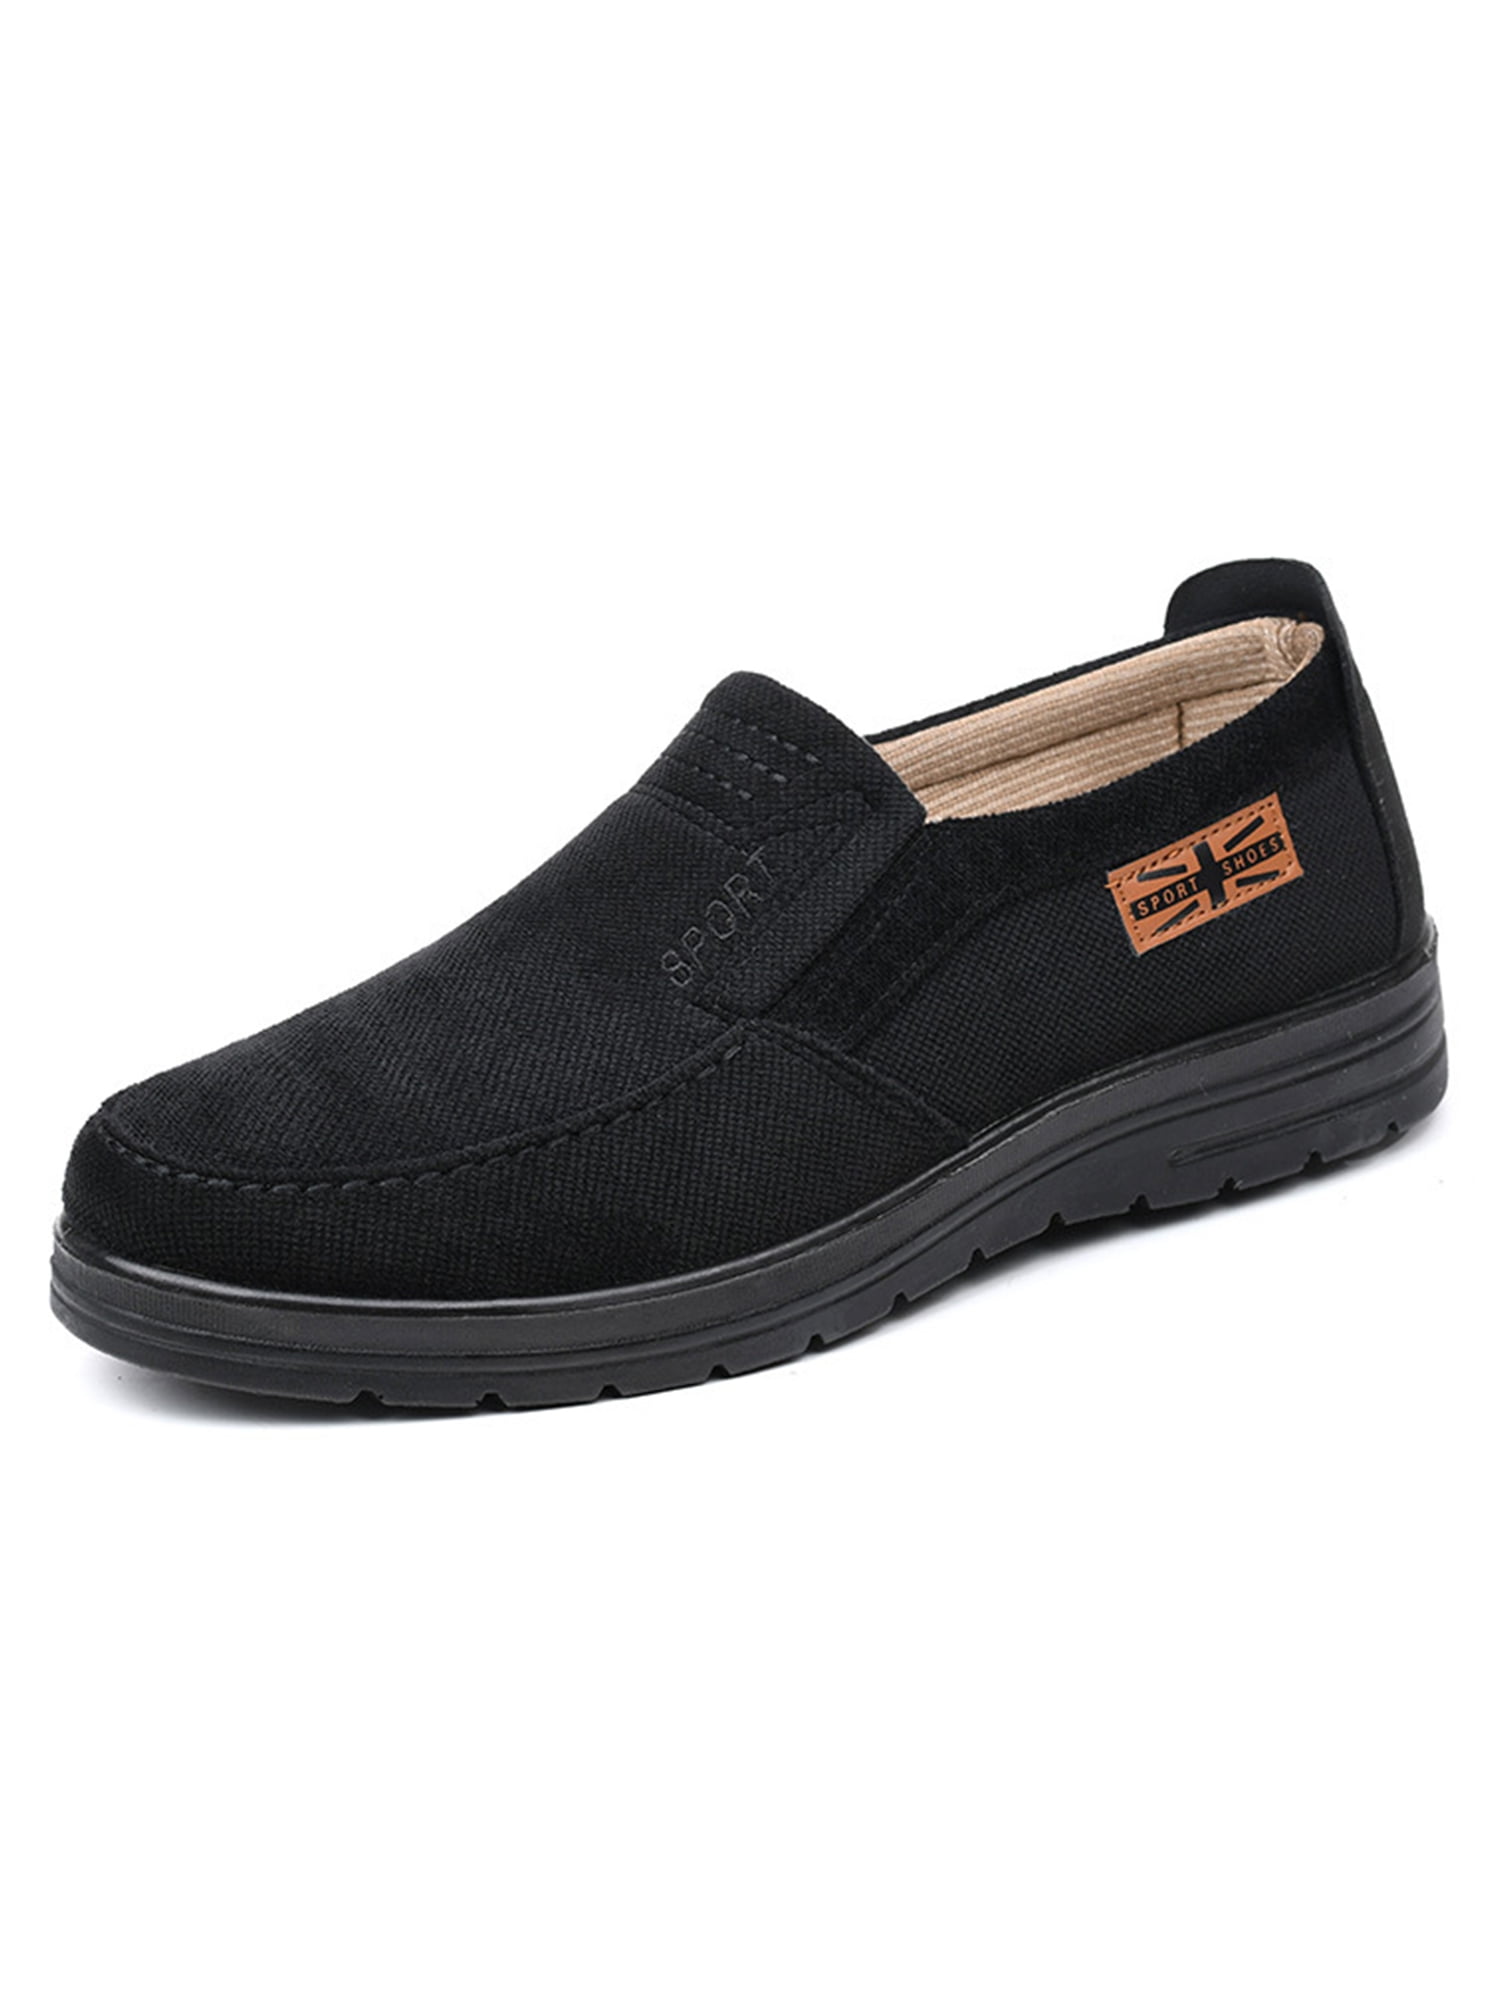 Frontwalk Man Walking Shoes Slip On Flats Comfort Loafers Driving ...